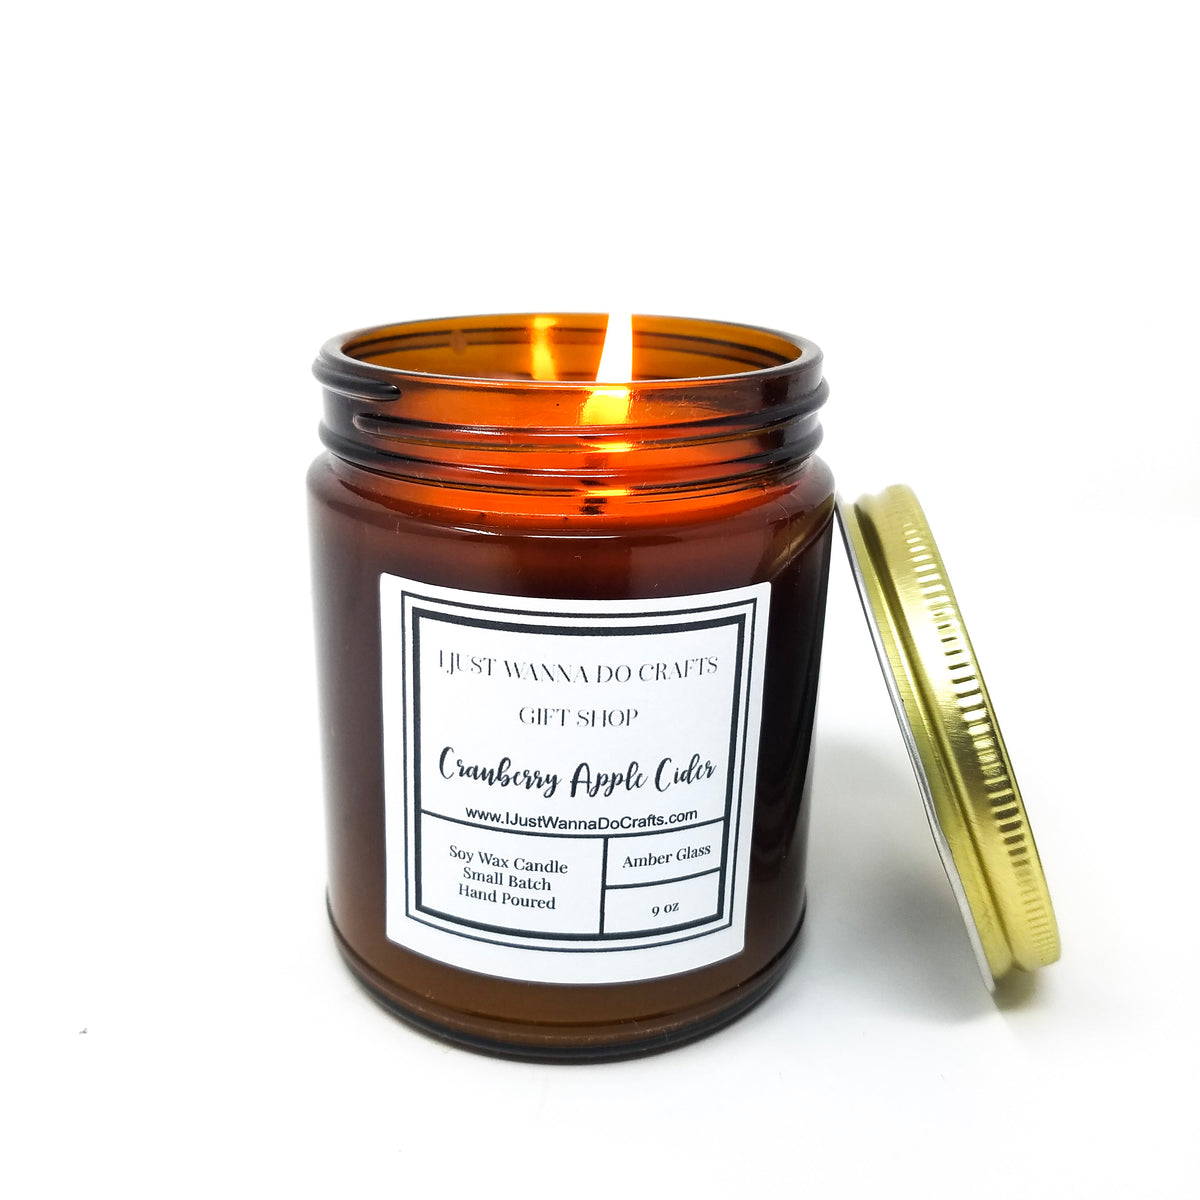 Cranberry & Apple Coconut-Soy Wax Candle – MADE Art Boutique